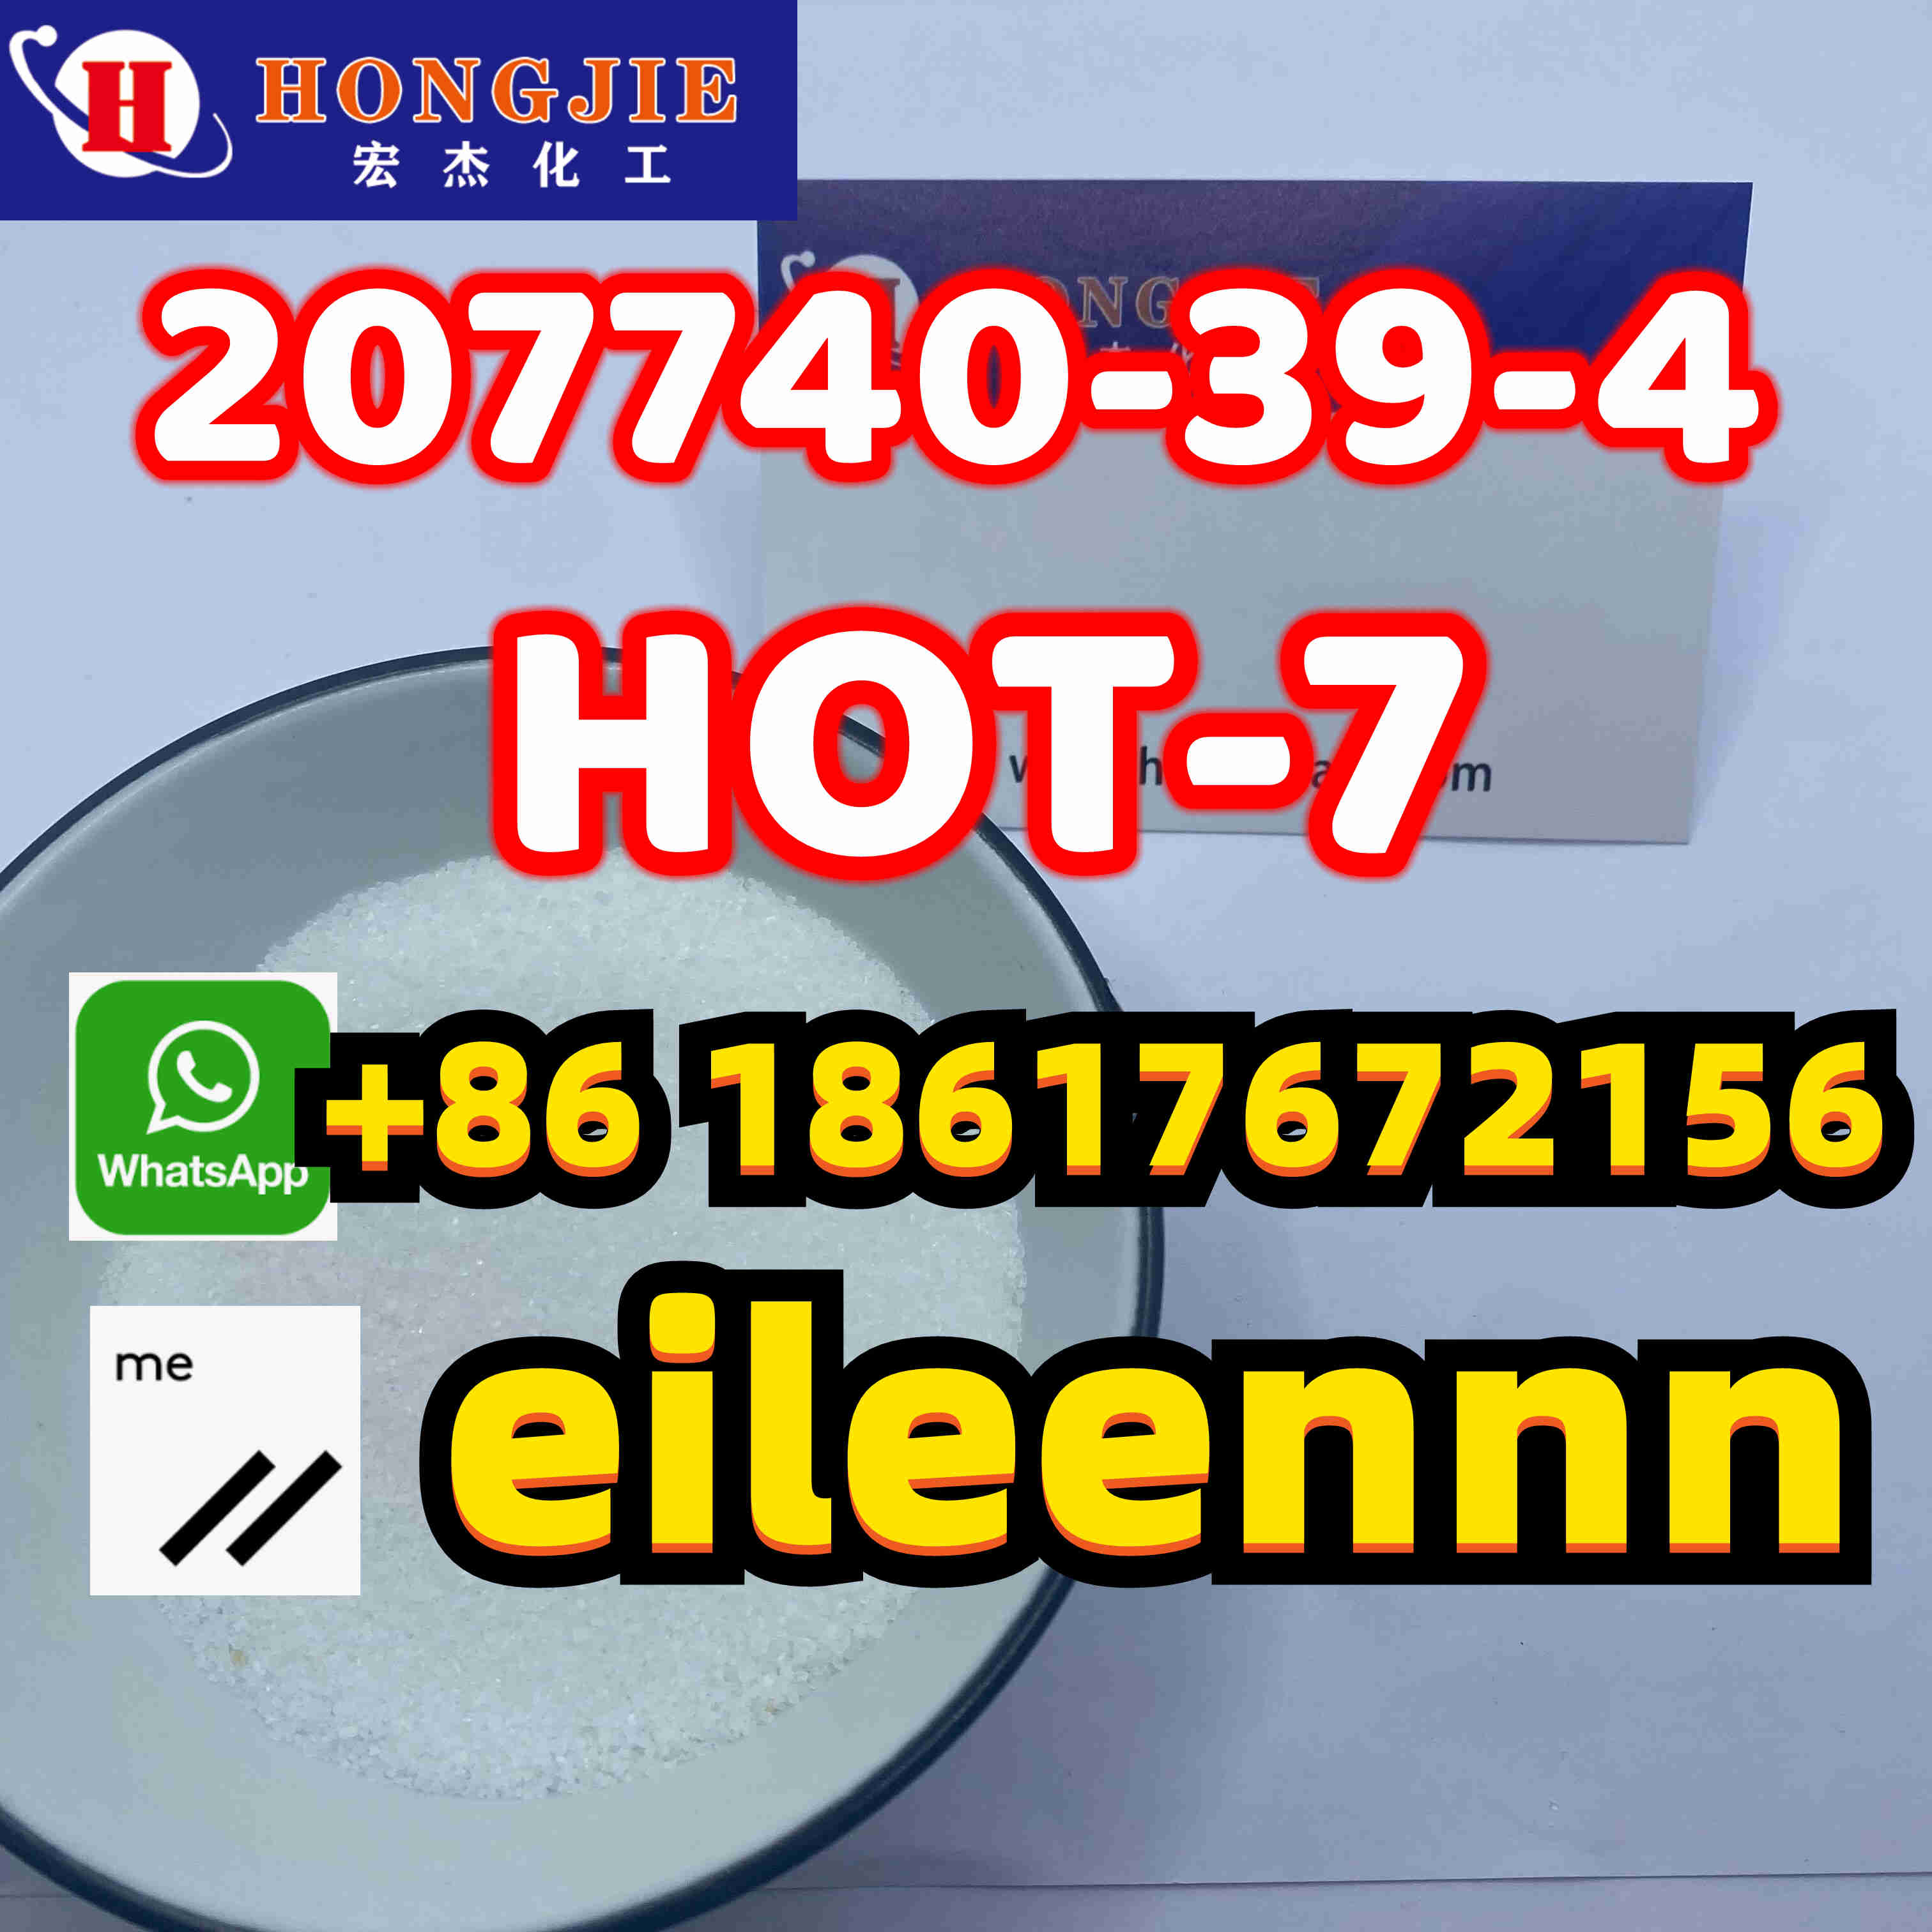 HOT-7	207740-39-4 Factory Direct Supply - photo